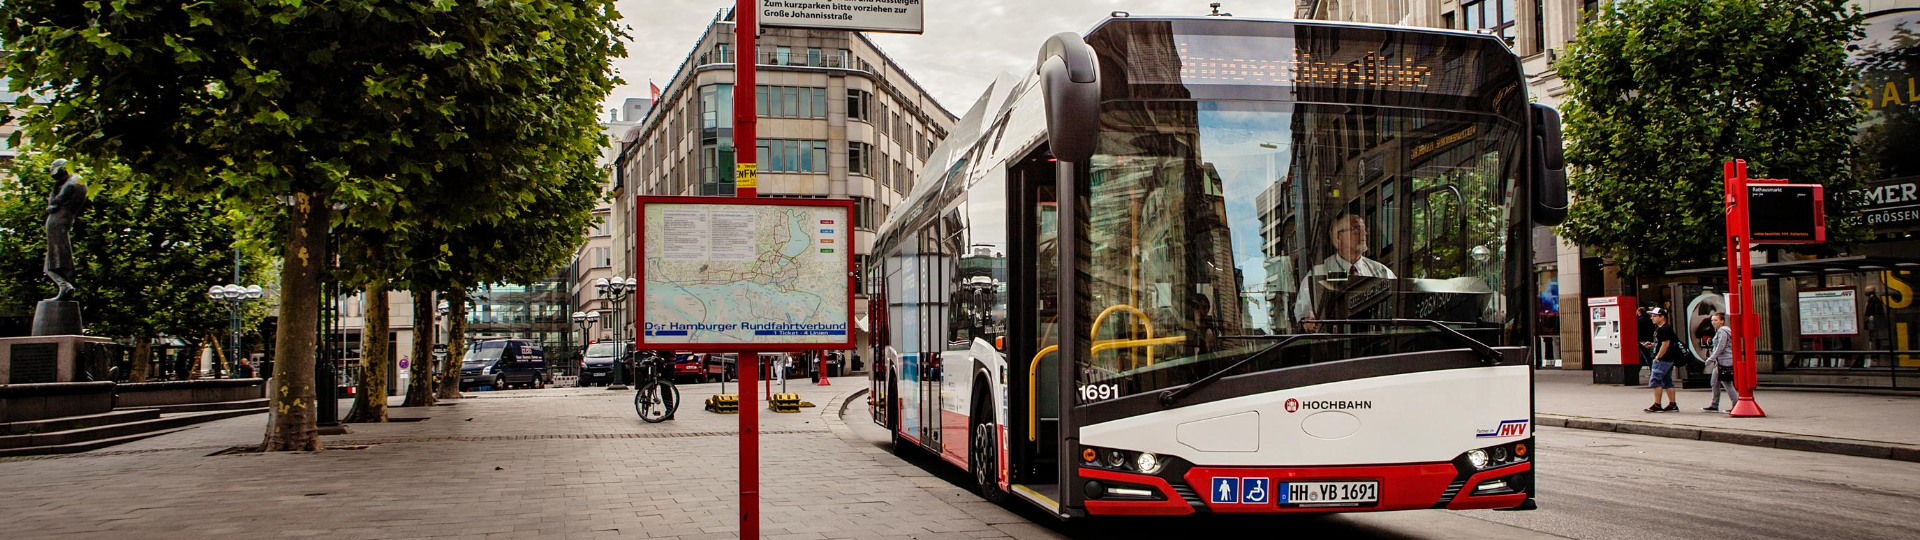 Solaris selected as one of the suppliers to deliver more than 500 electric buses to Hamburg!